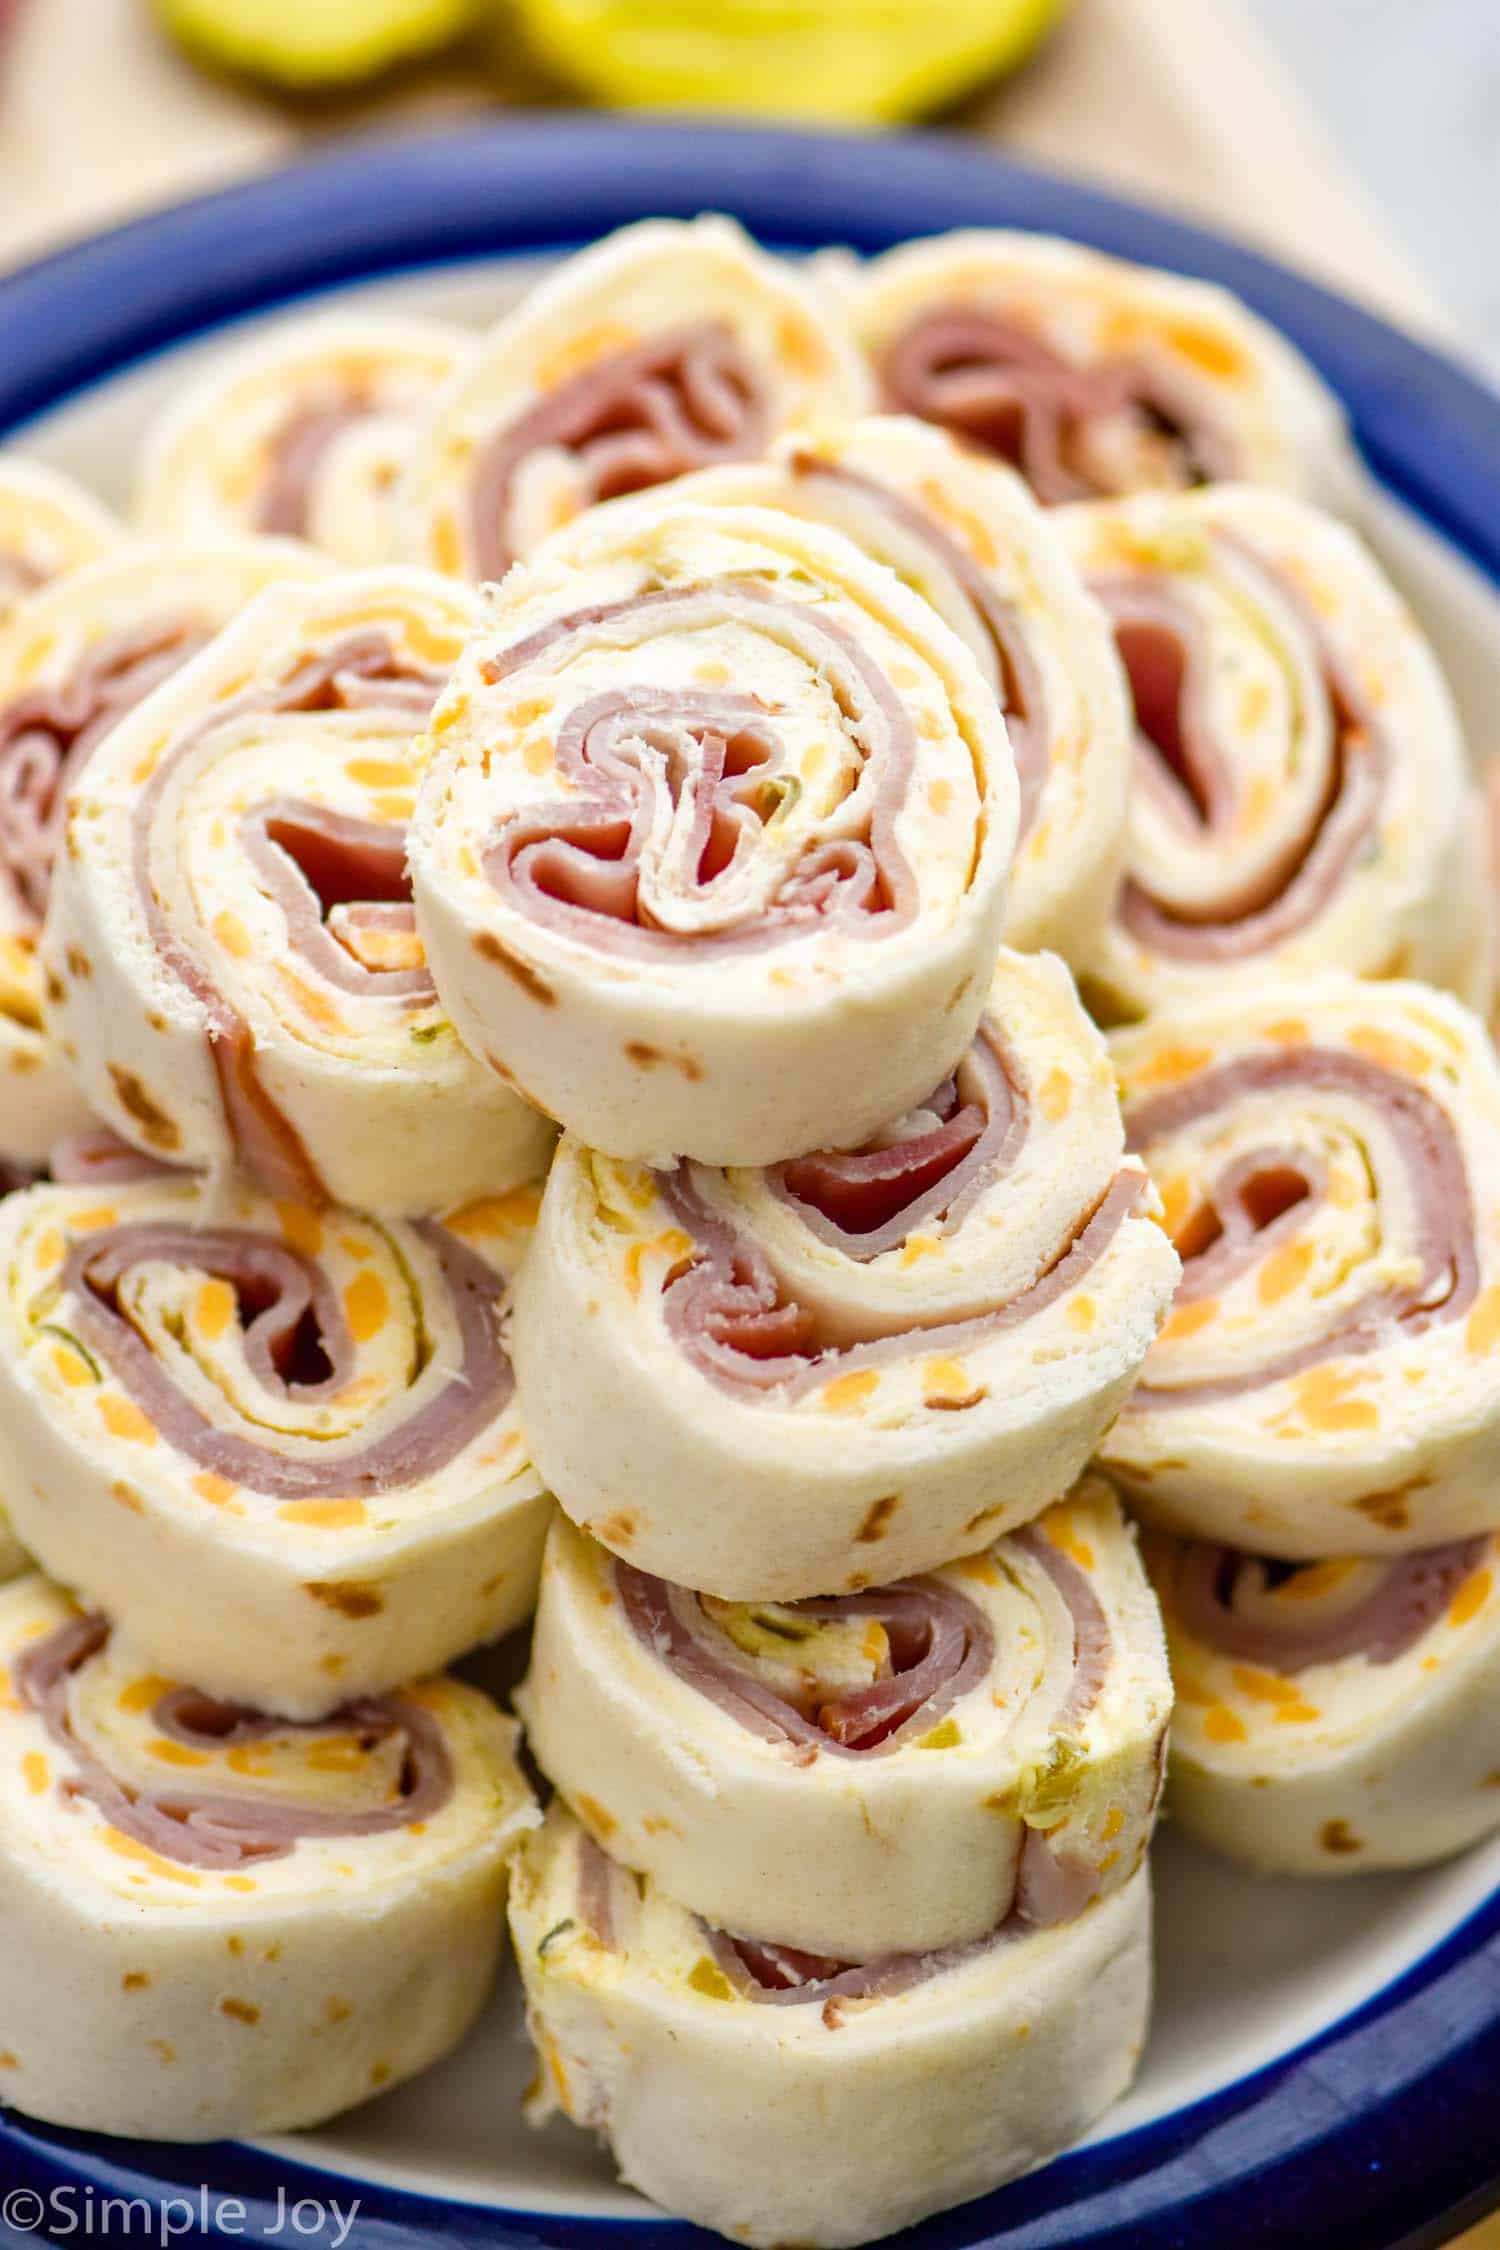 https://www.simplejoy.com/wp-content/uploads/2021/06/ham-and-cheese-roll-ups.jpg